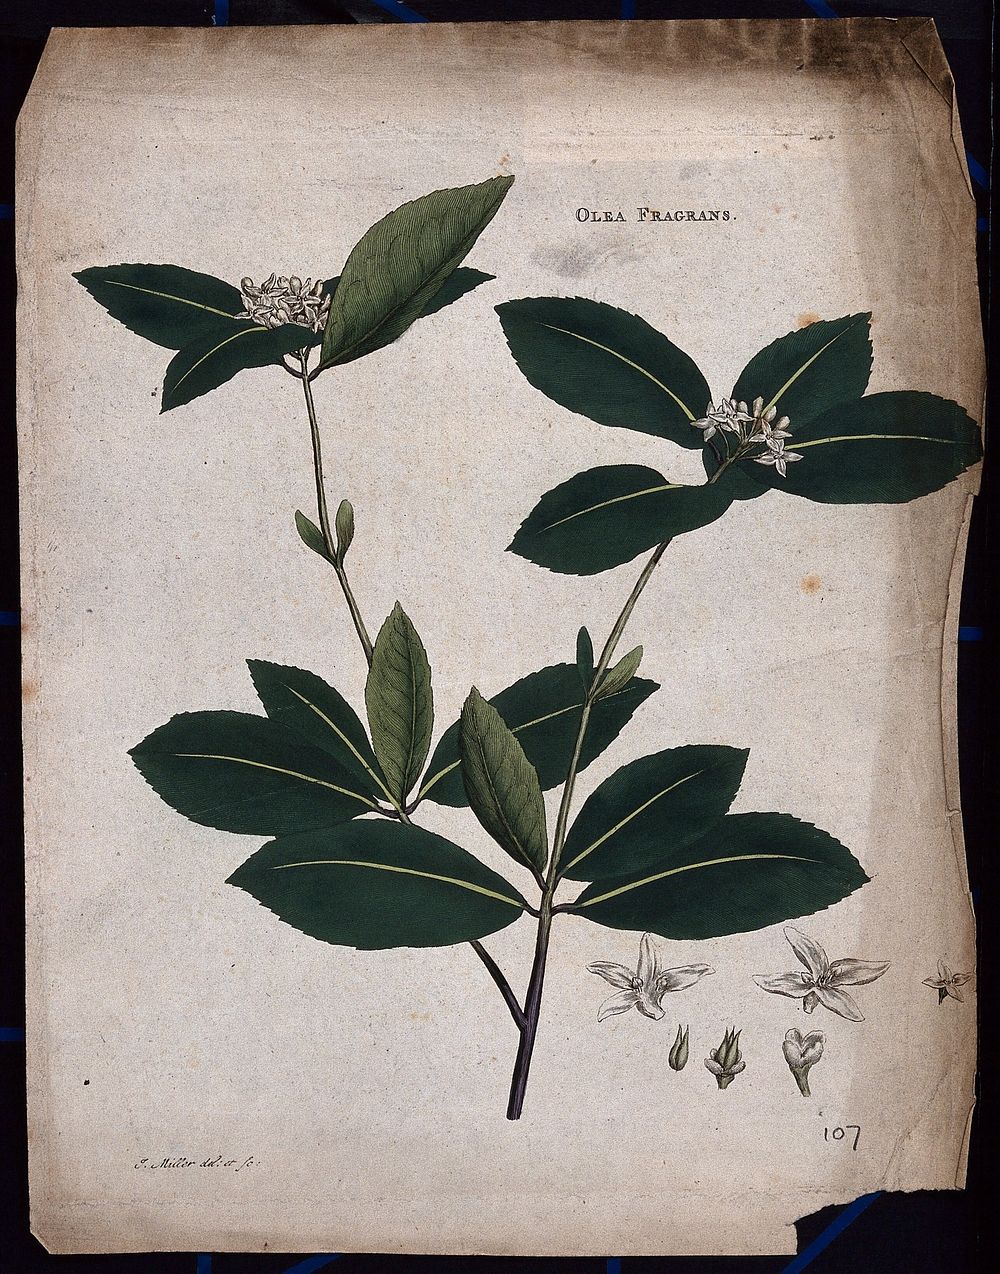 Kwei plant (Osmanthus fragrans): flowering stem with floral segments. Coloured etching by J. Miller, c. 1771.